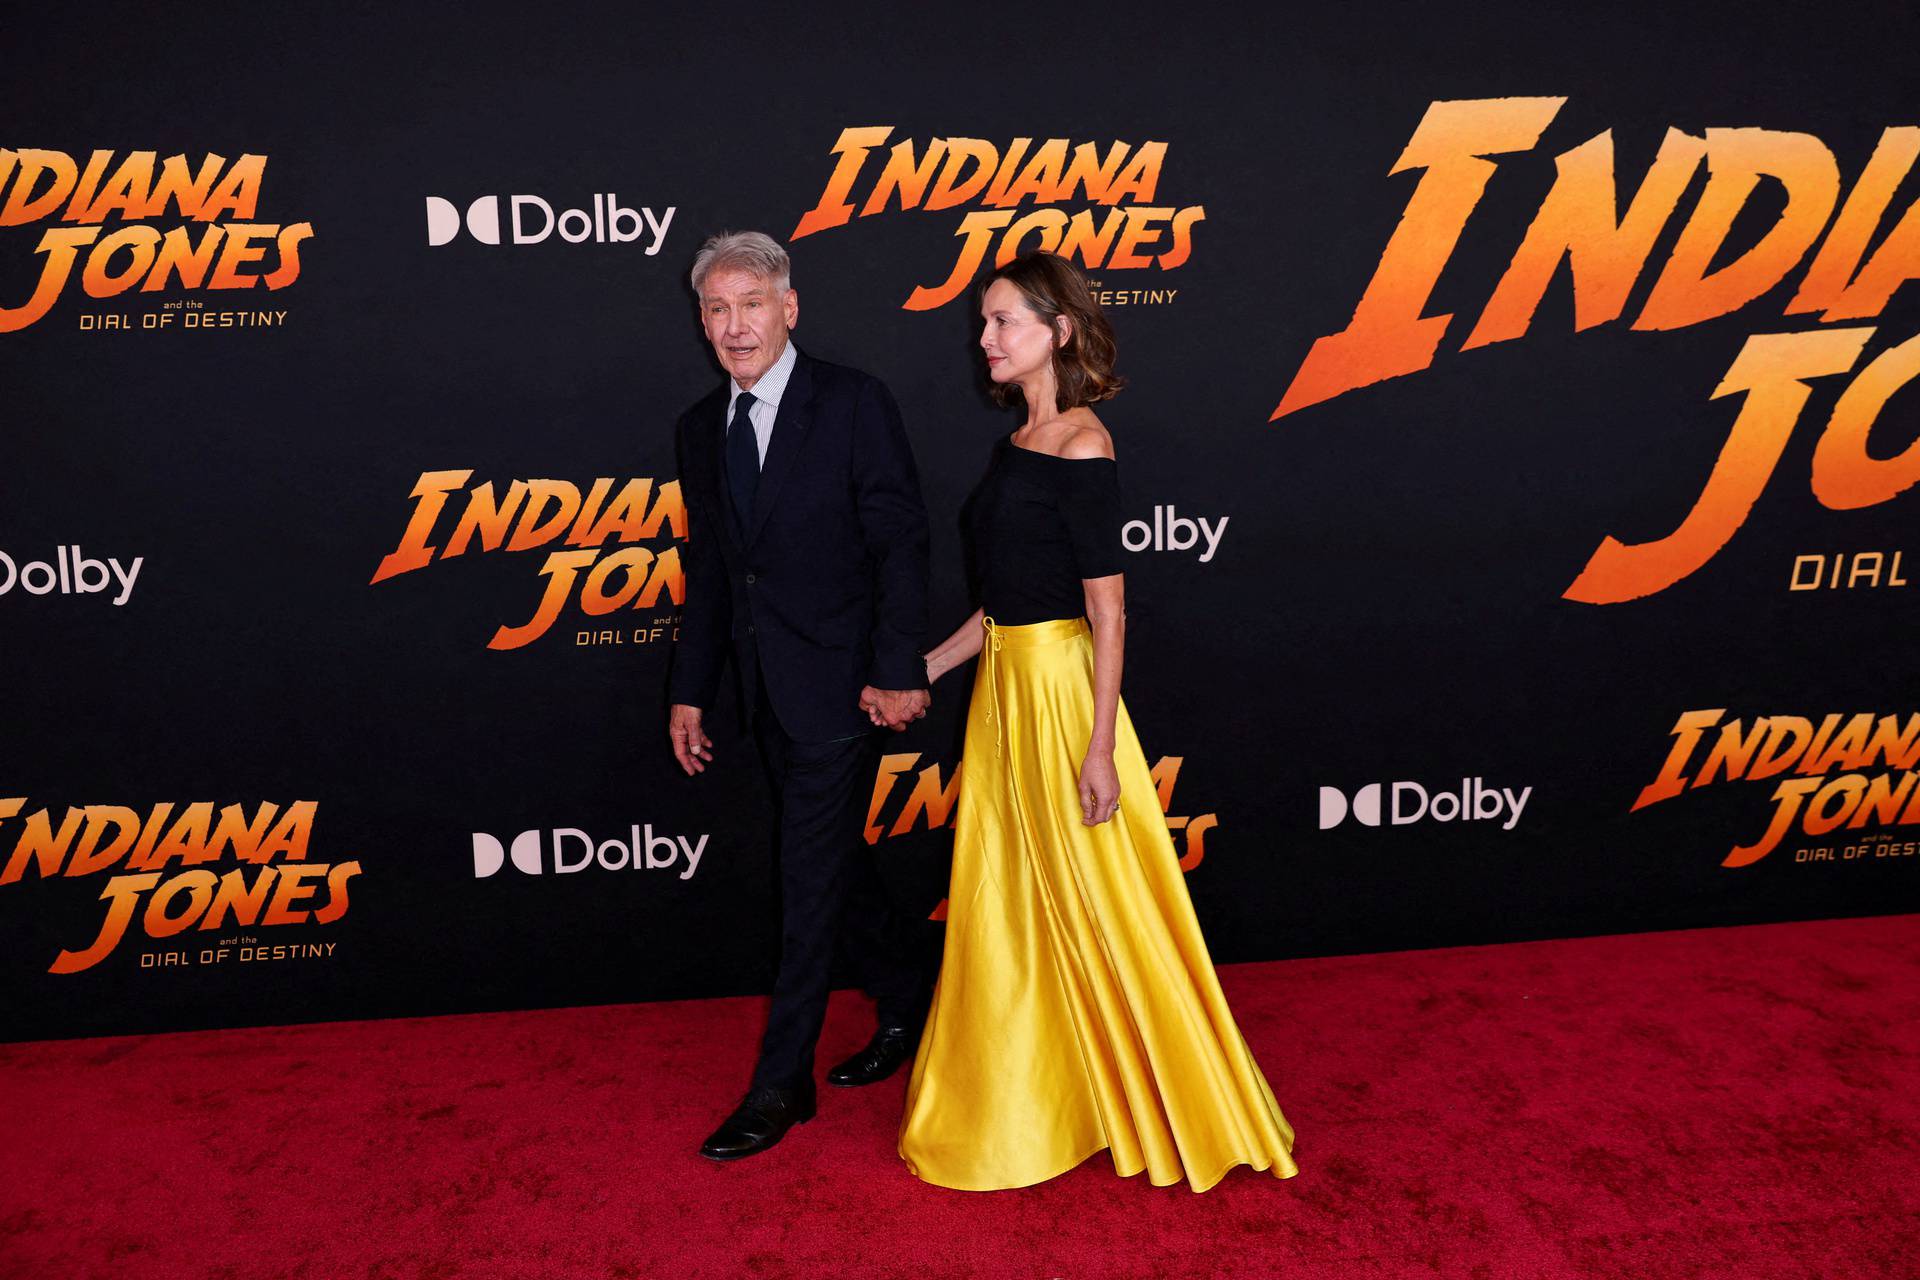 Harrison Ford  at U.S. premiere of  "Indiana Jones and the Dial of Destiny" in Los Angeles